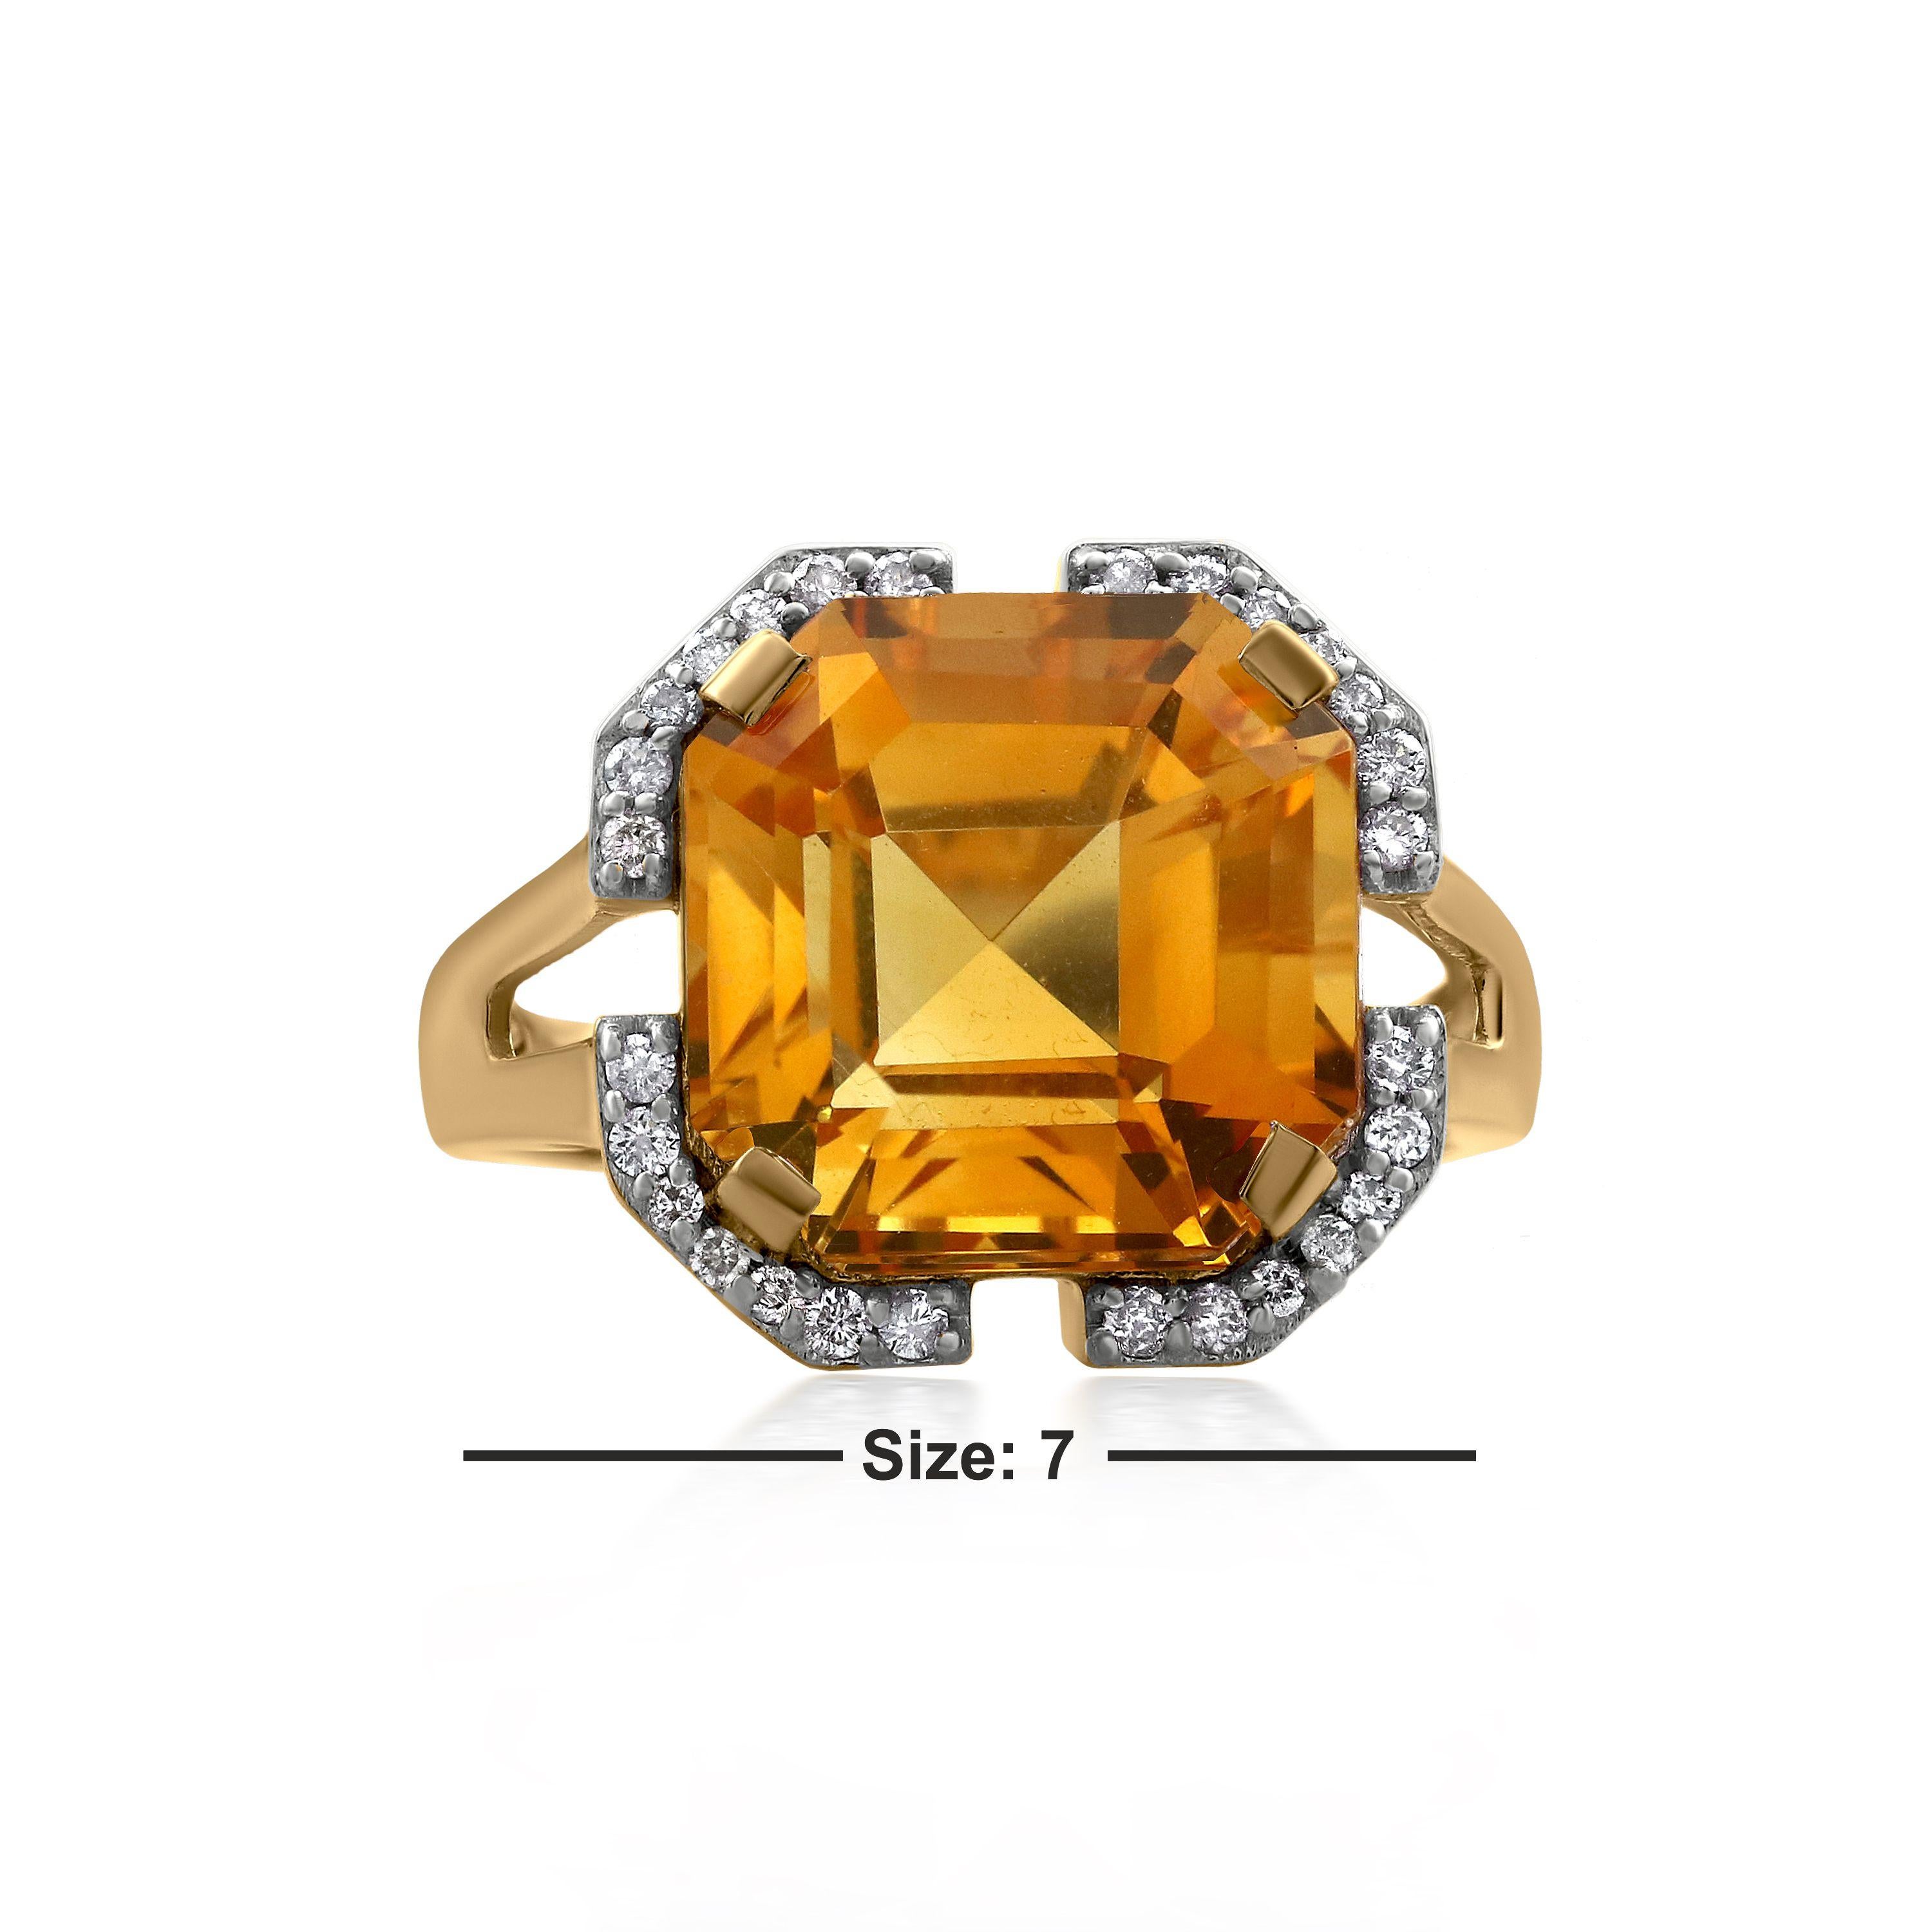 Contemporary Gemistry 7.4 Carat Asscher Cut Citrine Solitaire Ring with Diamond in 14K Gold